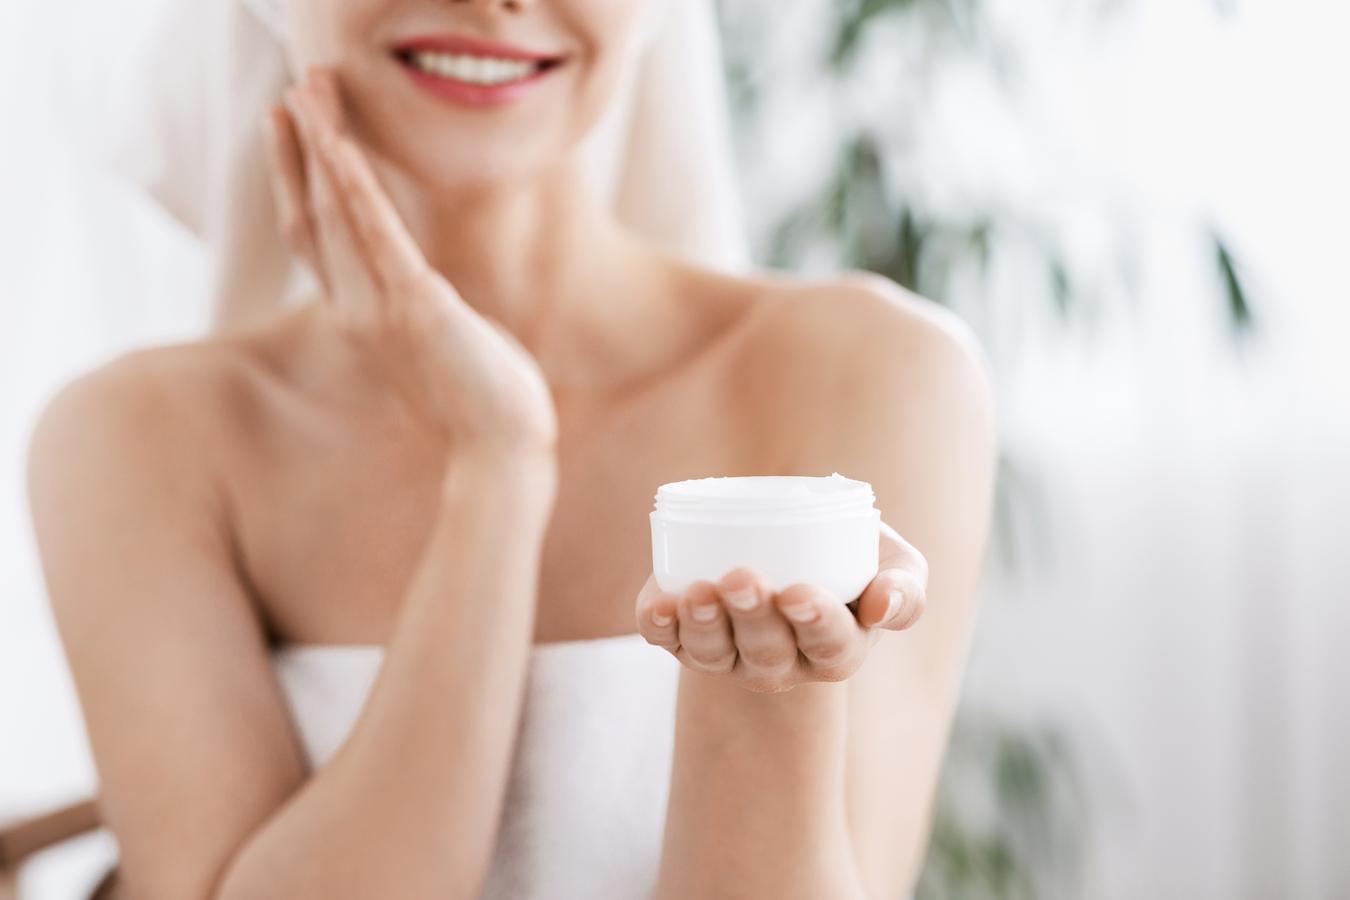 Use a water based moisturizing cream after a shower to prevent dry skin